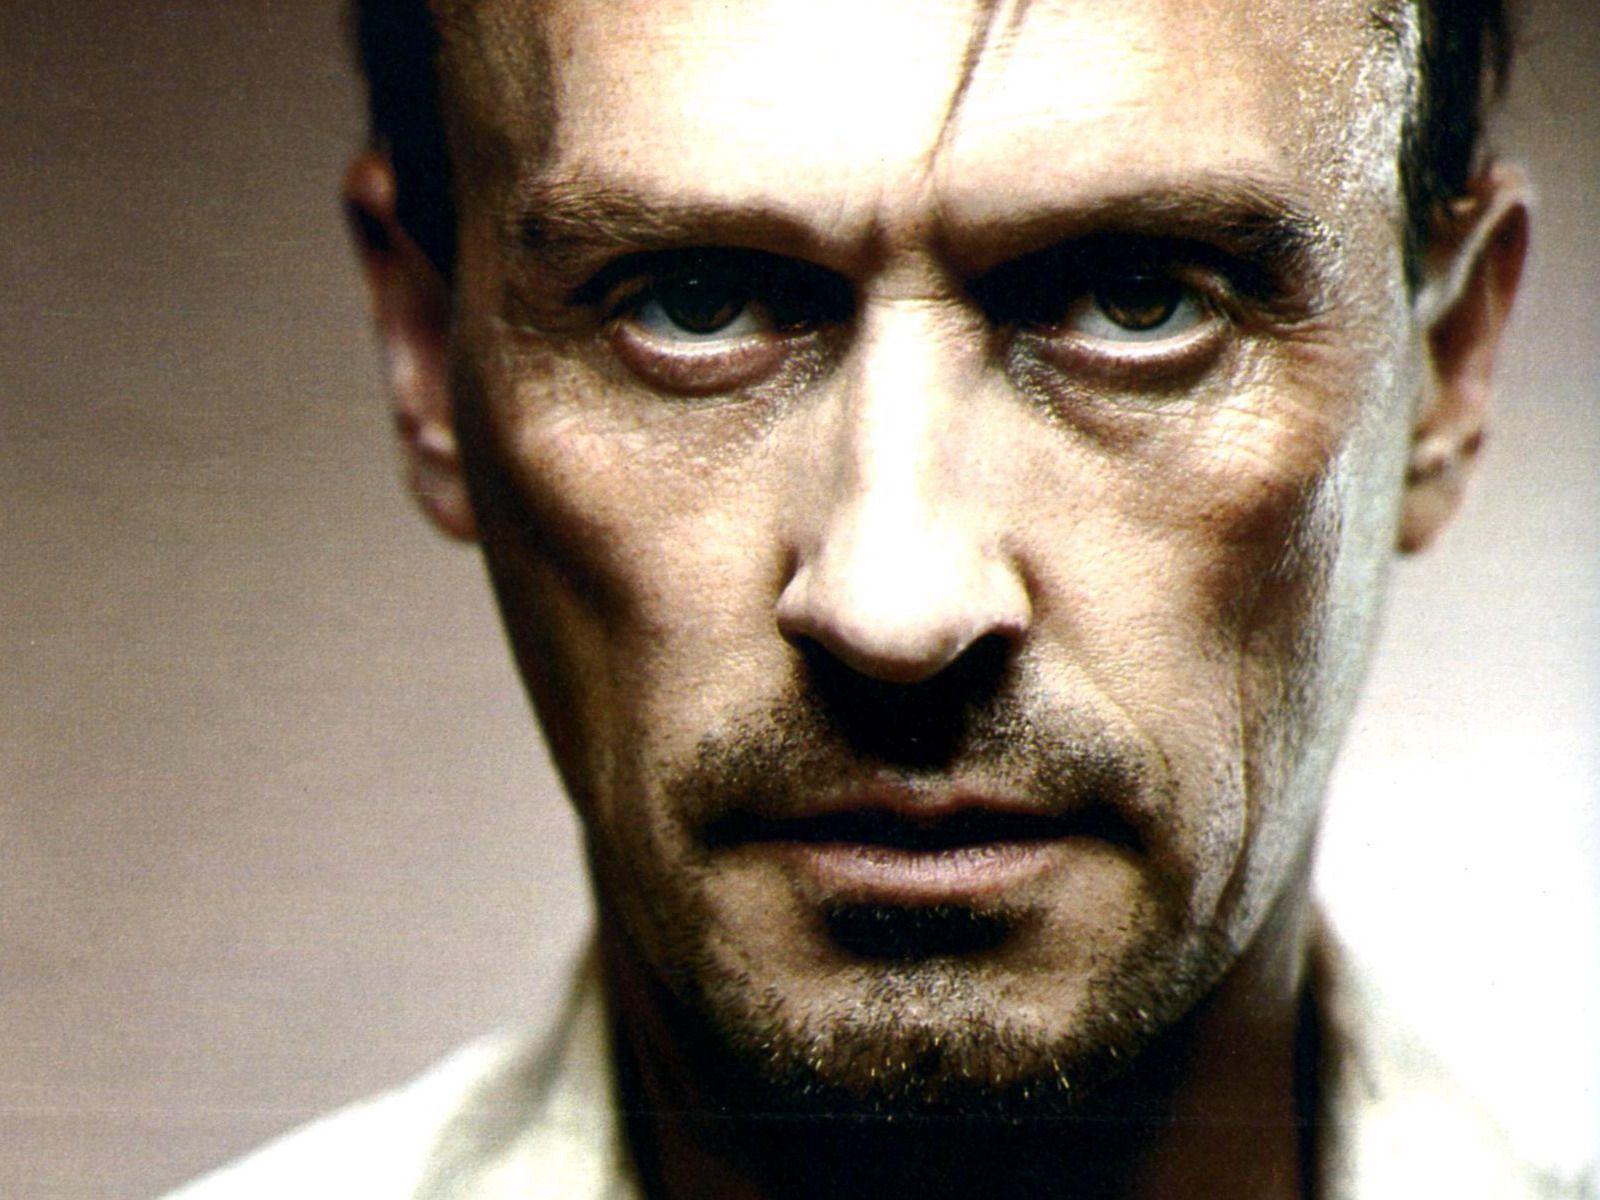 Robert Knepper- I think he is cool looking.there, I said it